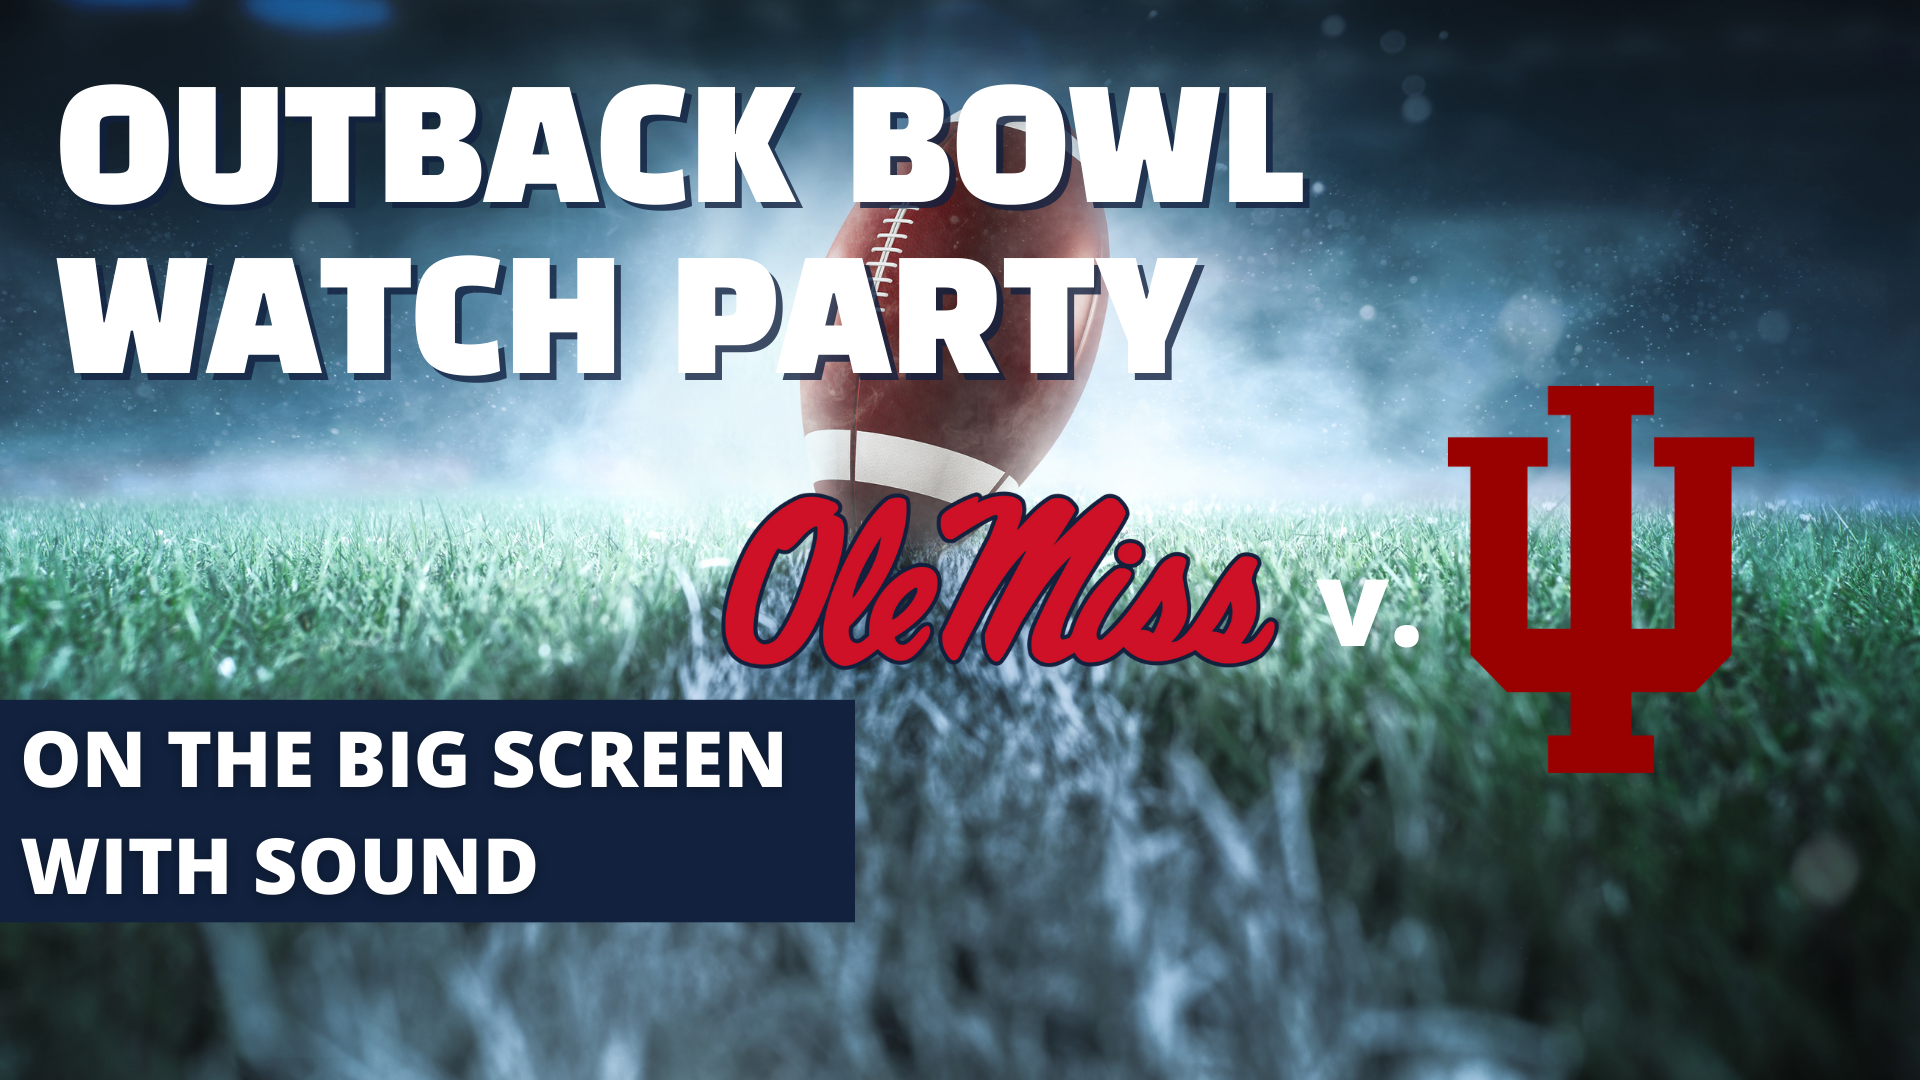 Ole Miss vs. Indiana Watch Party - hero